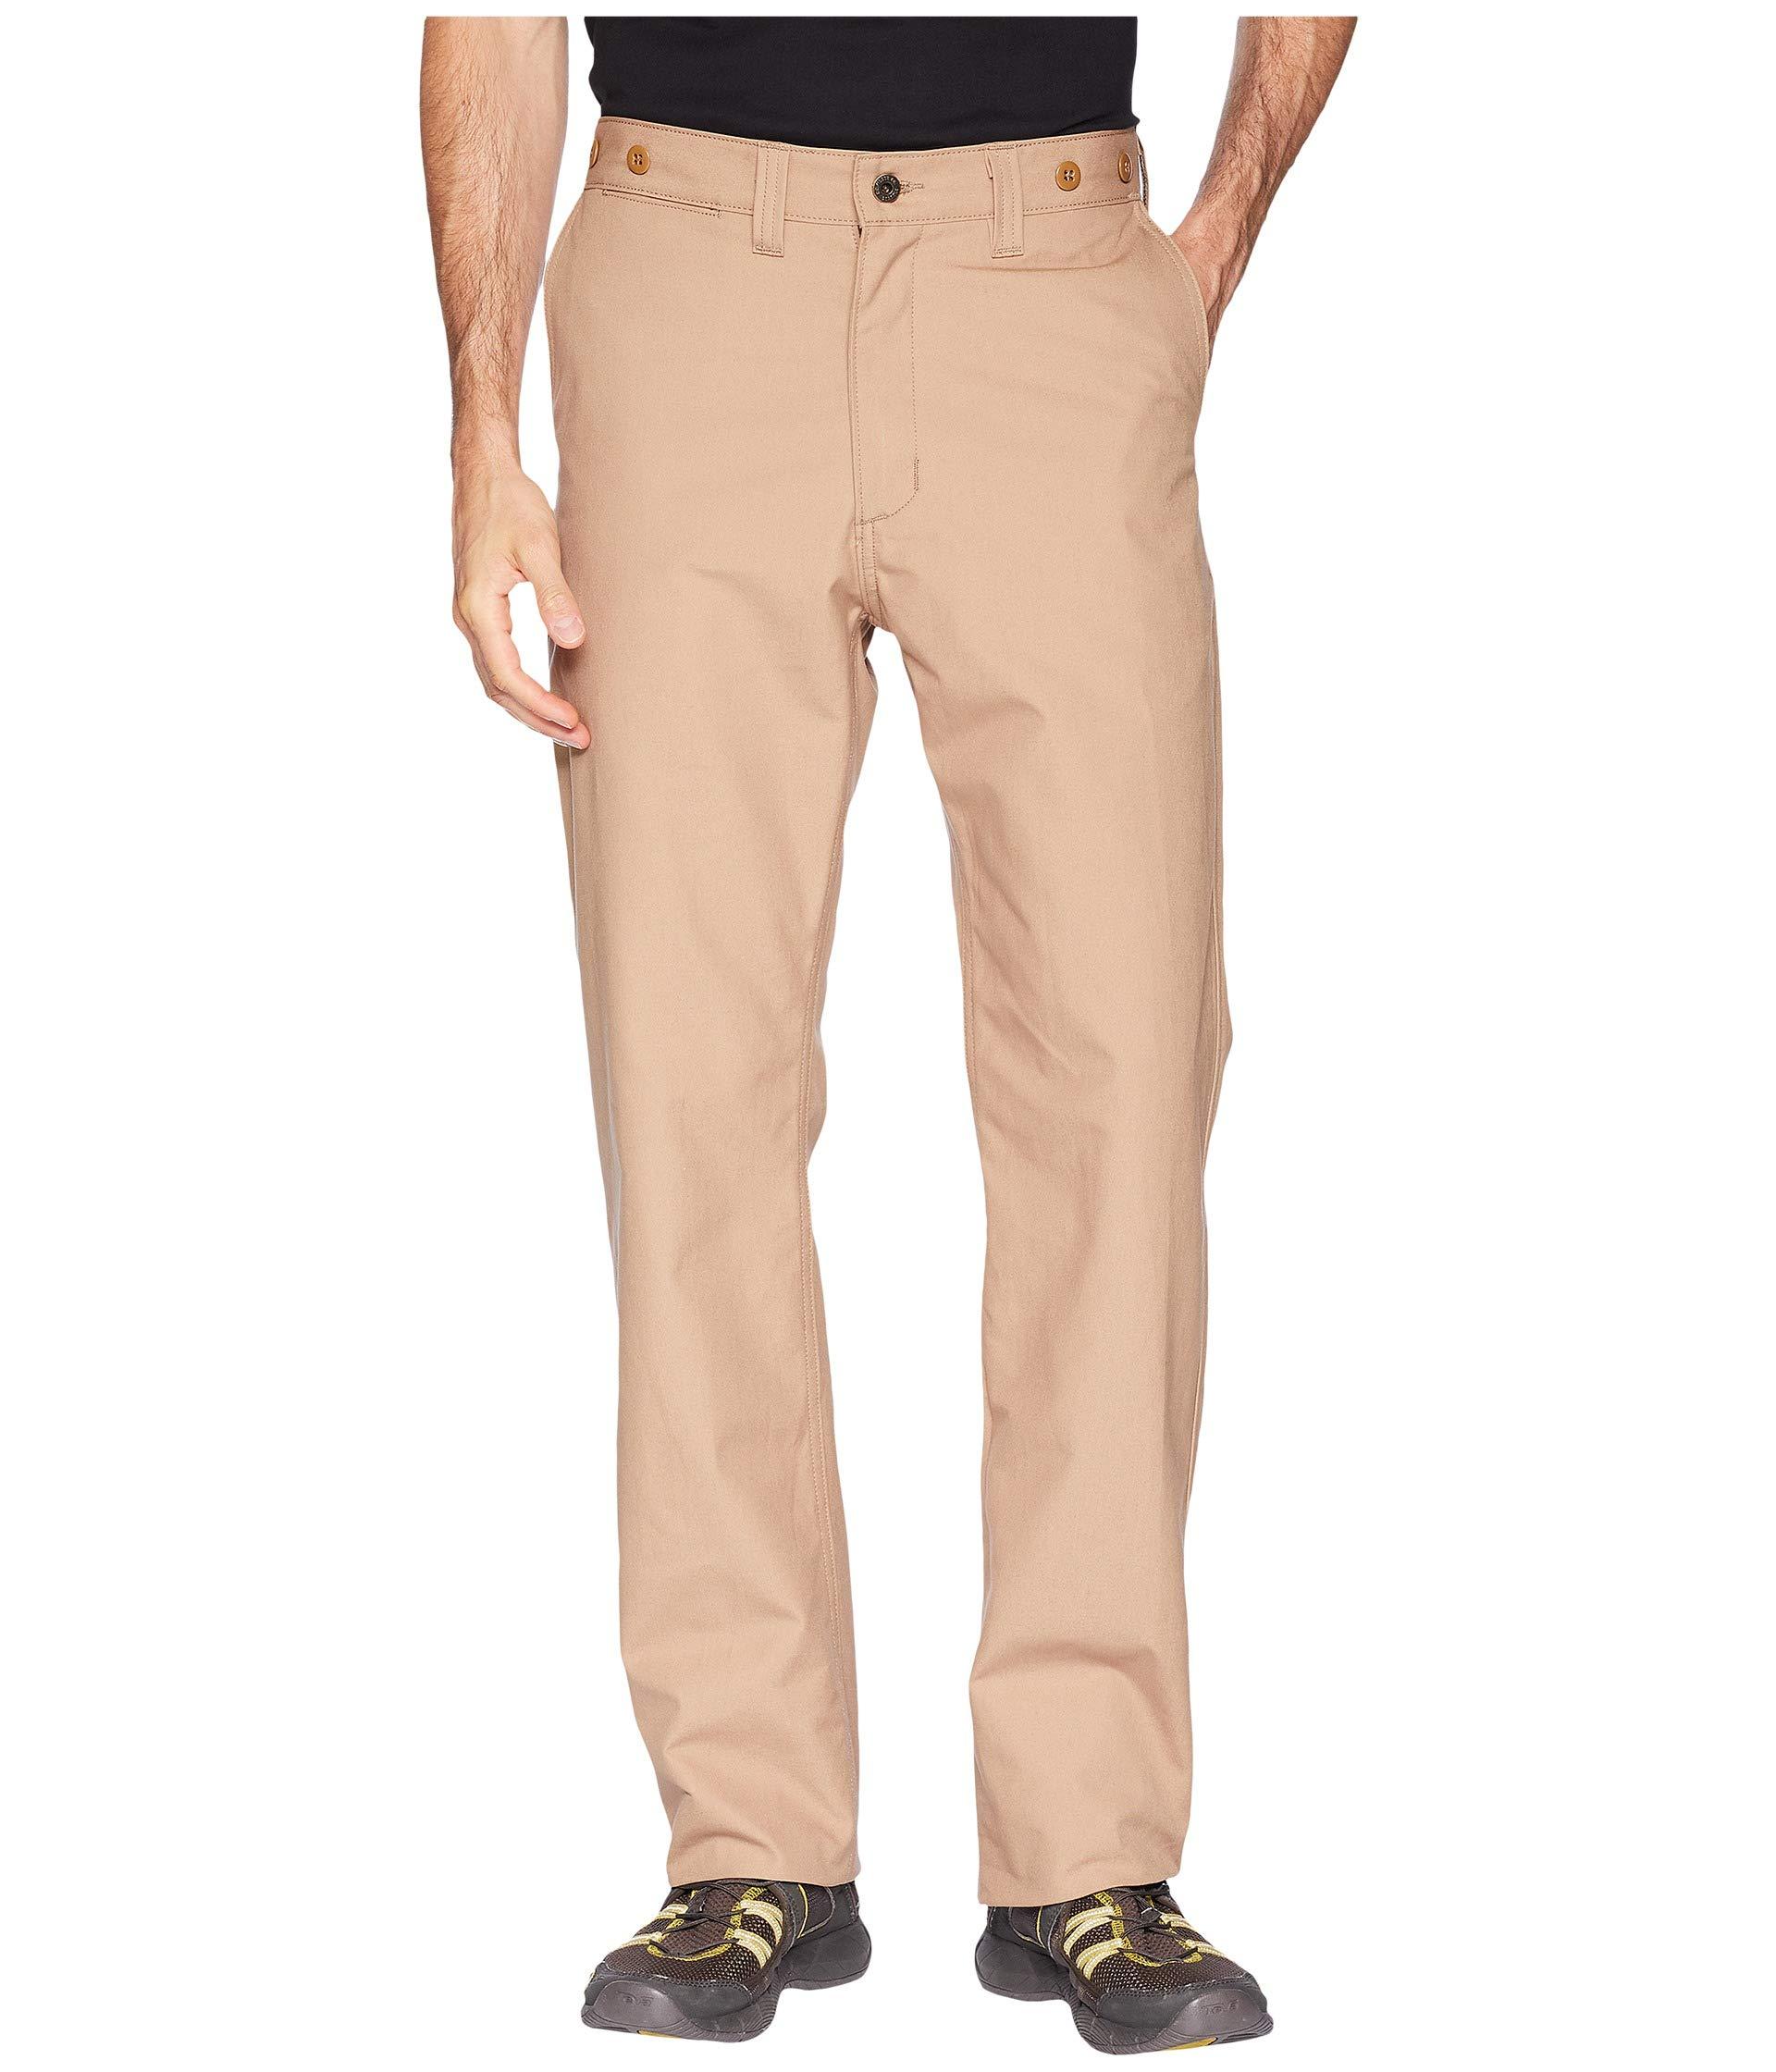 Filson Cotton Dry Shelter Cloth Pants in Camel (Natural) for Men - Lyst